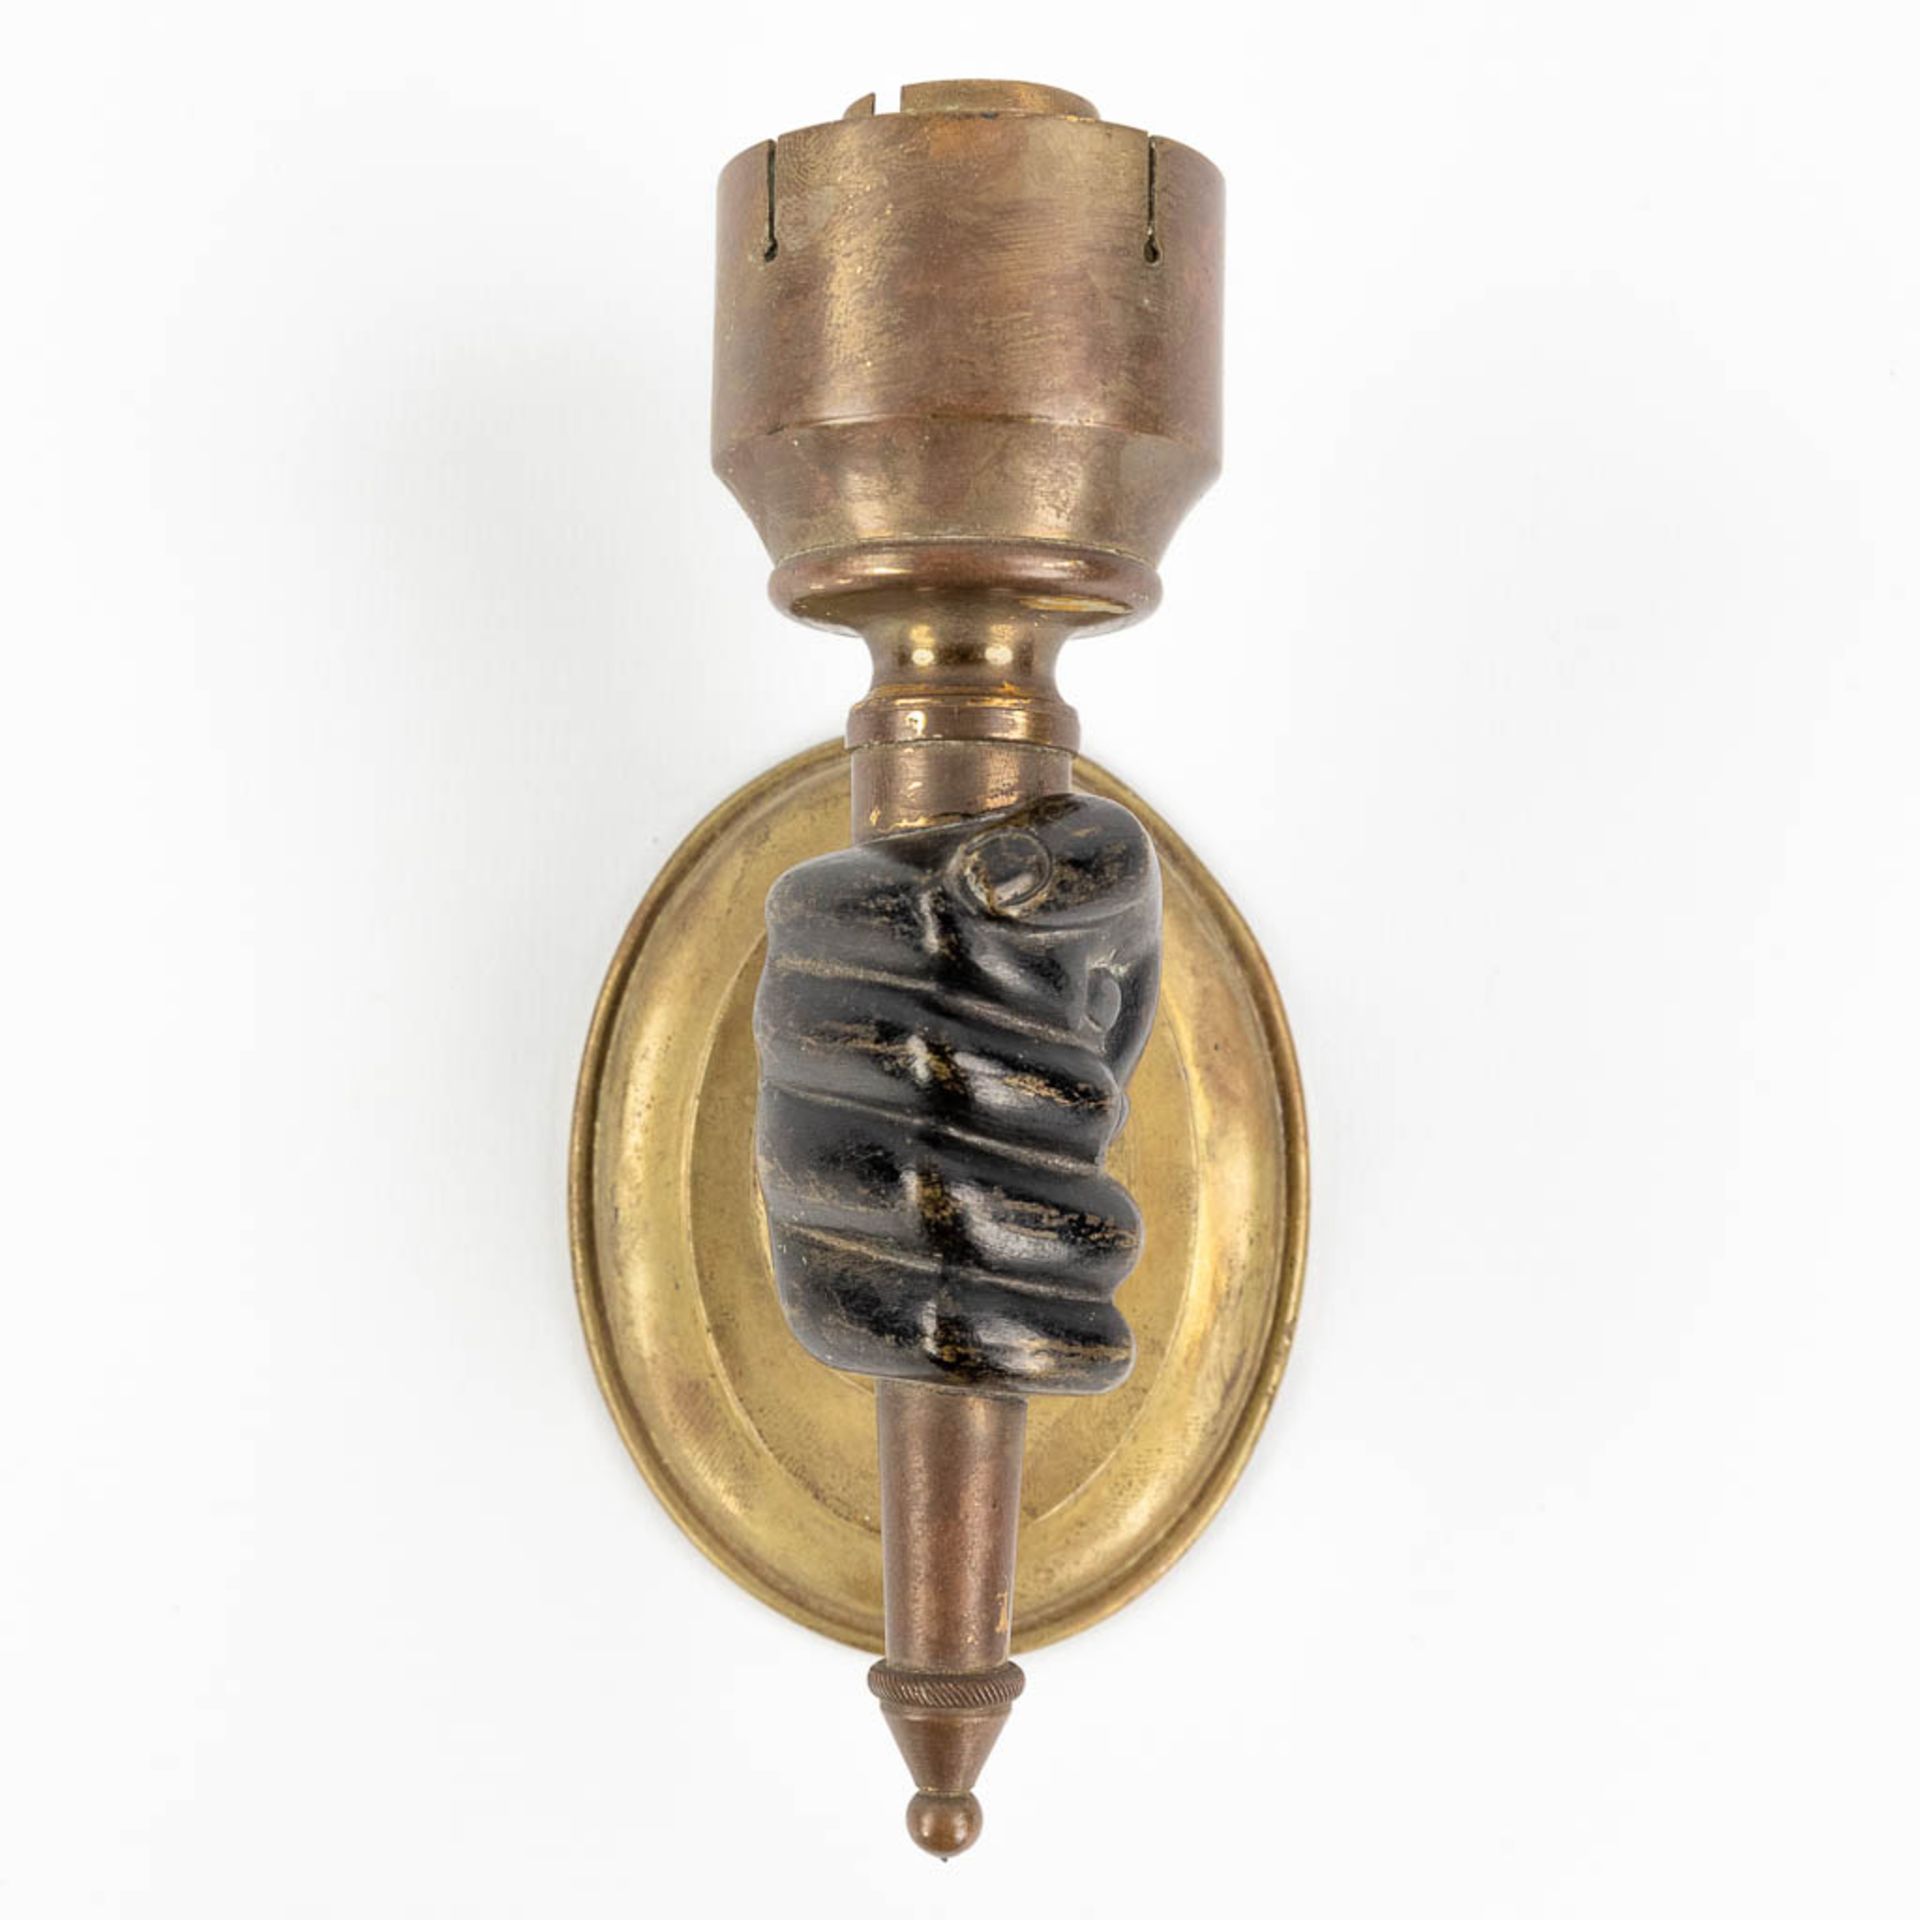 A pair of wall lamps in the shape of a hand with torch, circa 1900. (L:8 x W:7,5 x H:15 cm) - Image 3 of 10